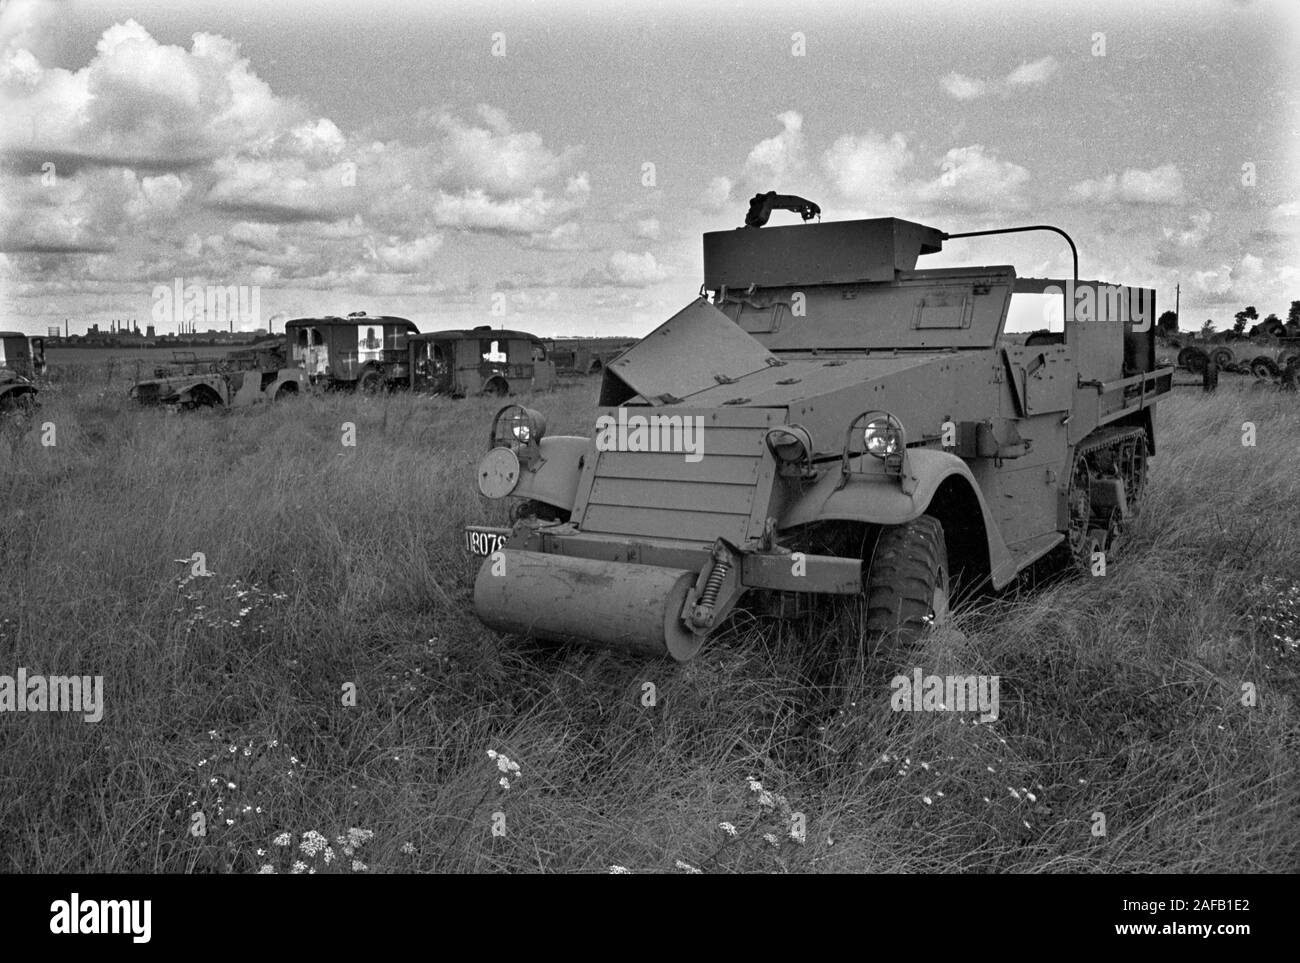 Second World War WW2 army military vehicles and  cars dumped in French landscape.1960s Normandy France. 1967 HOMER SYKES Stock Photo